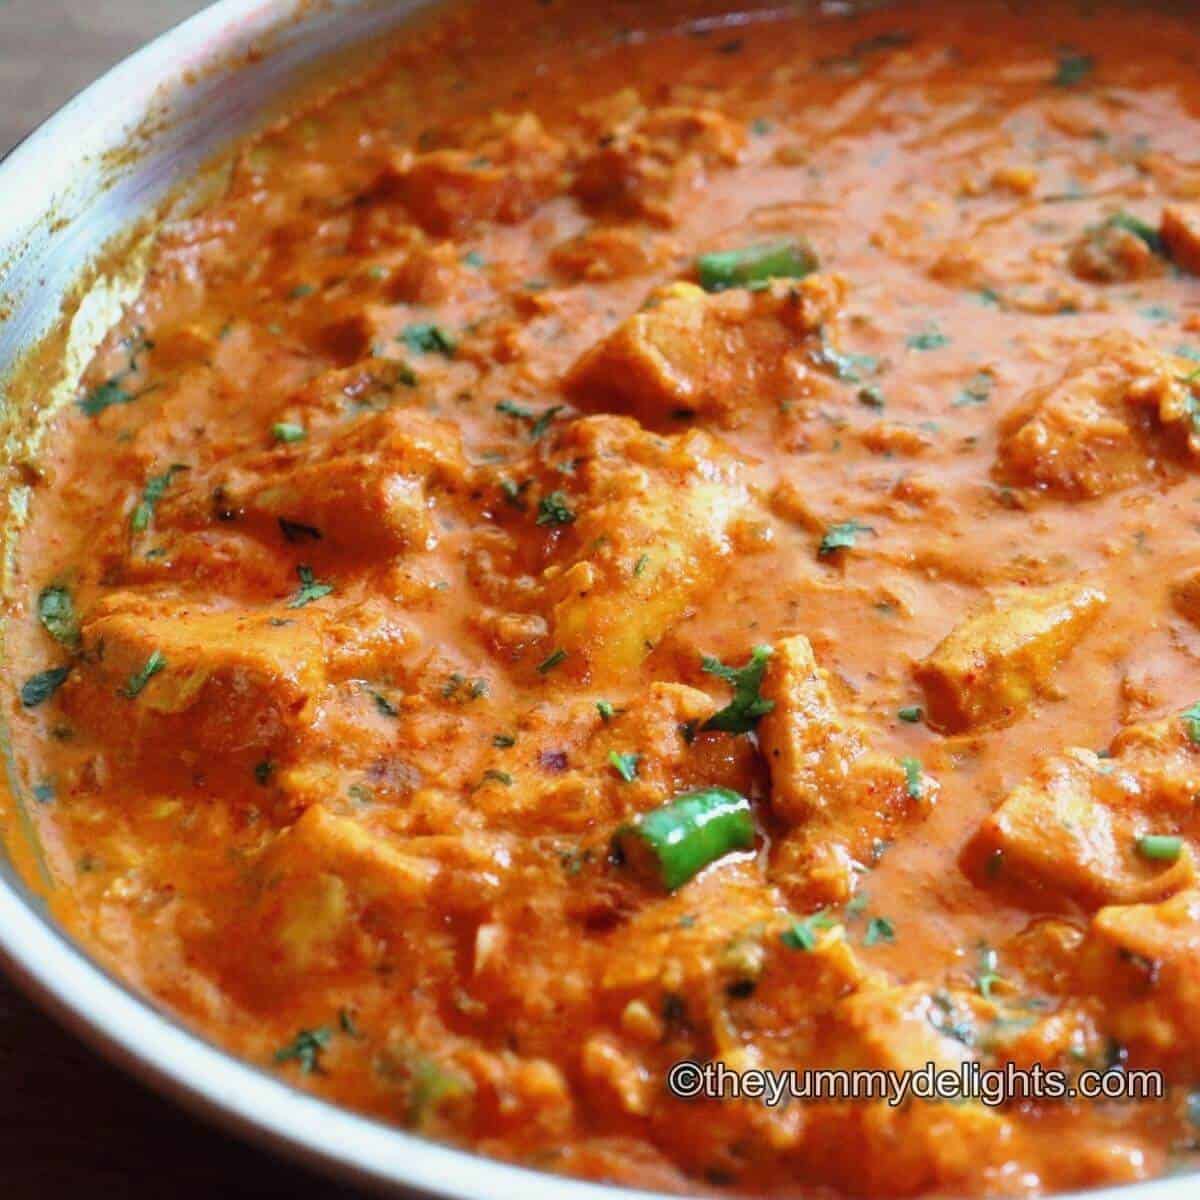 Garlic chicken curry in a pan. This garlic chicken curry is garnished with coriander leaves.